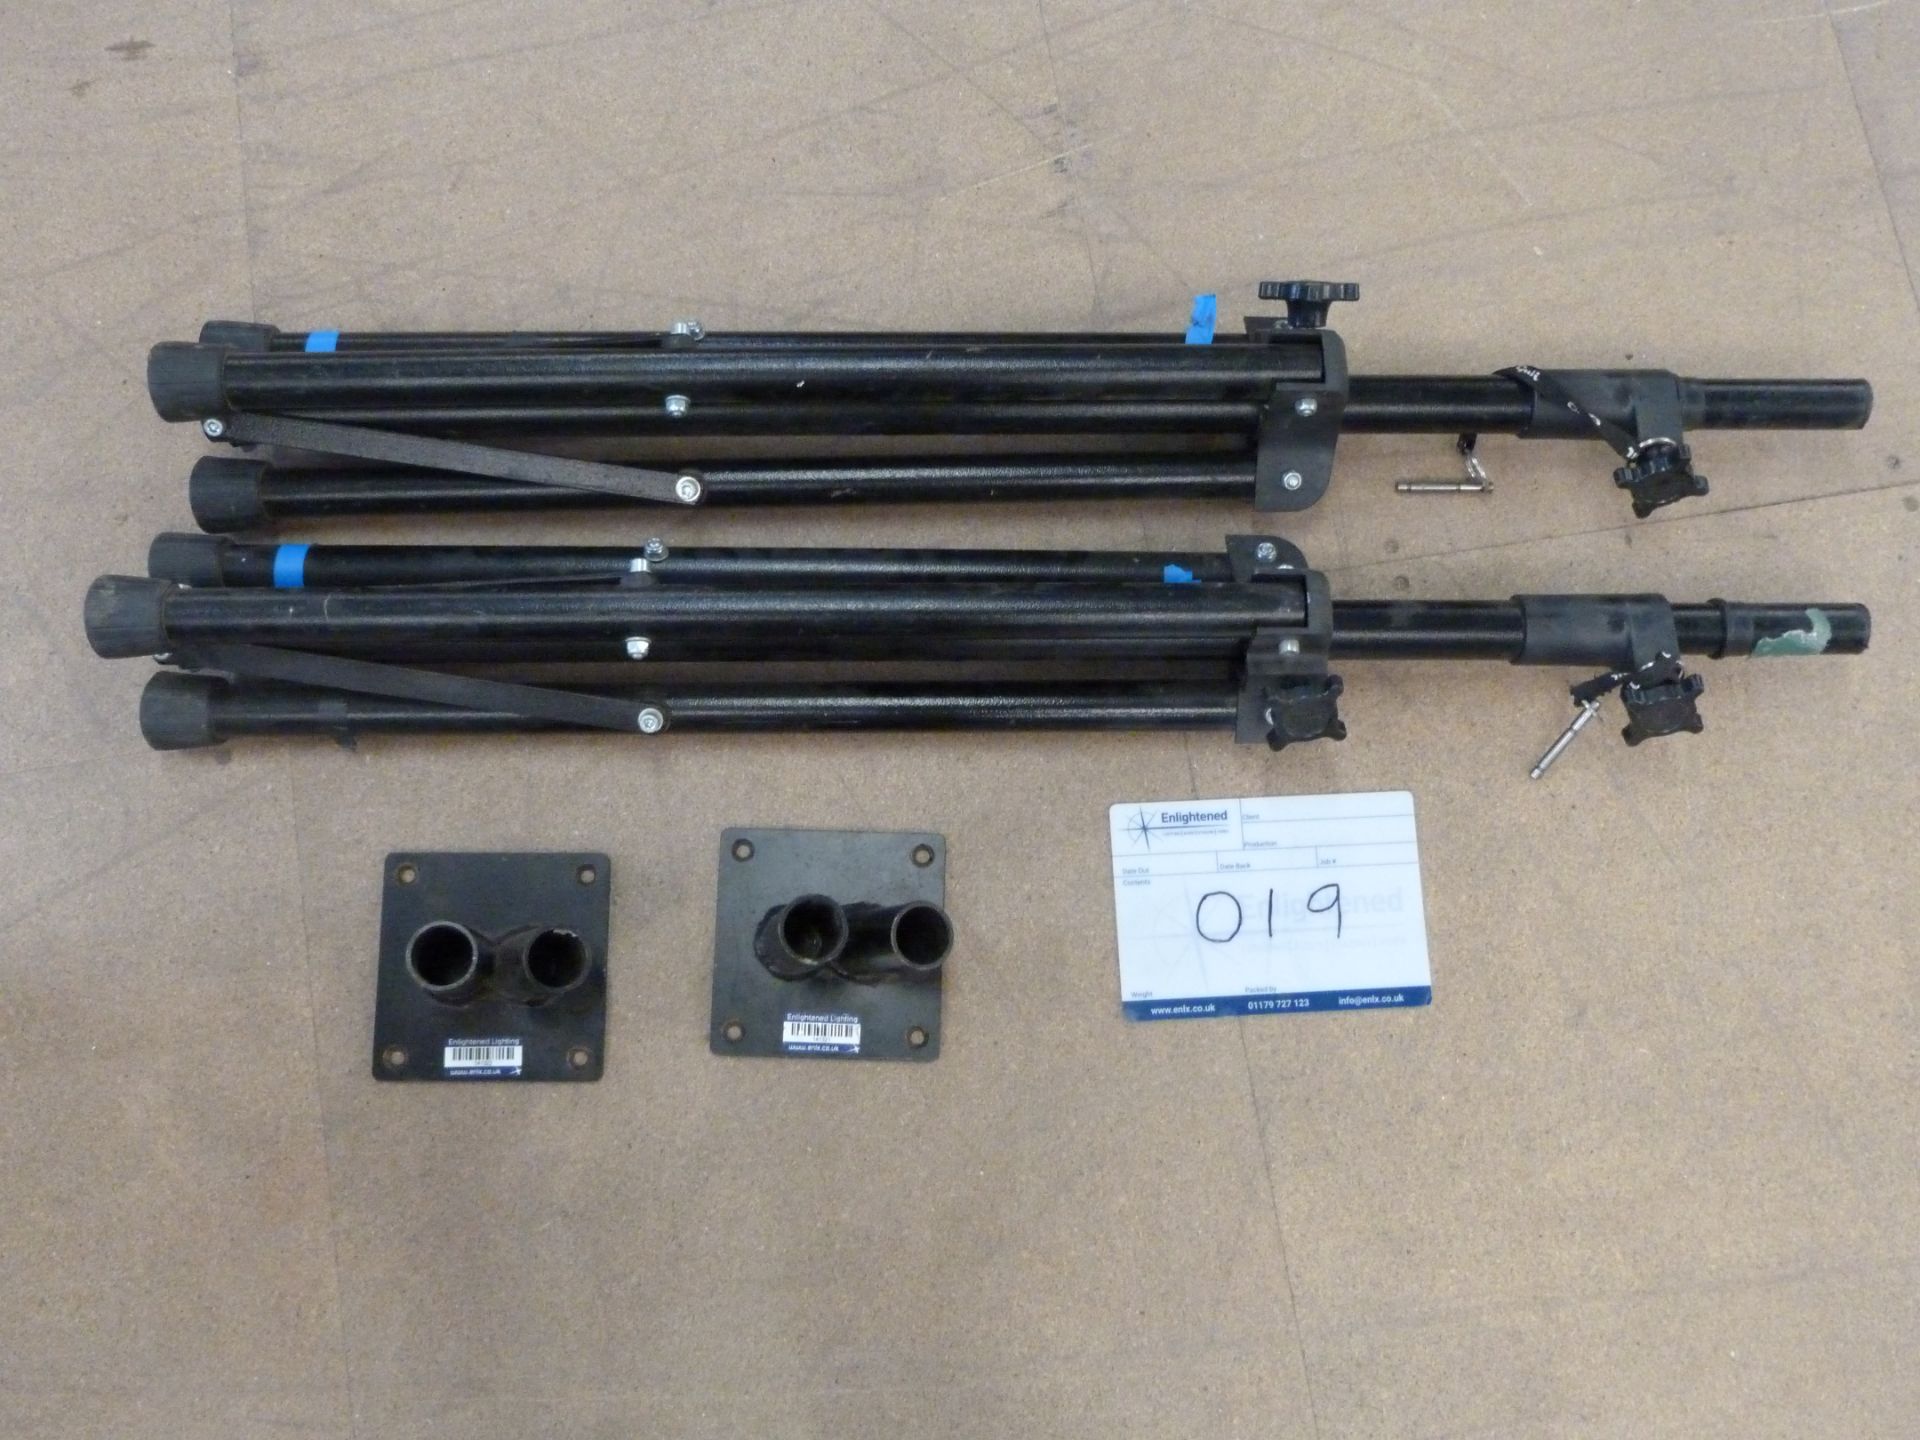 Martin Audio Tripod Kit. Included within Lot 10. If sum of Lots 11-20 is more than Lot 10, will be